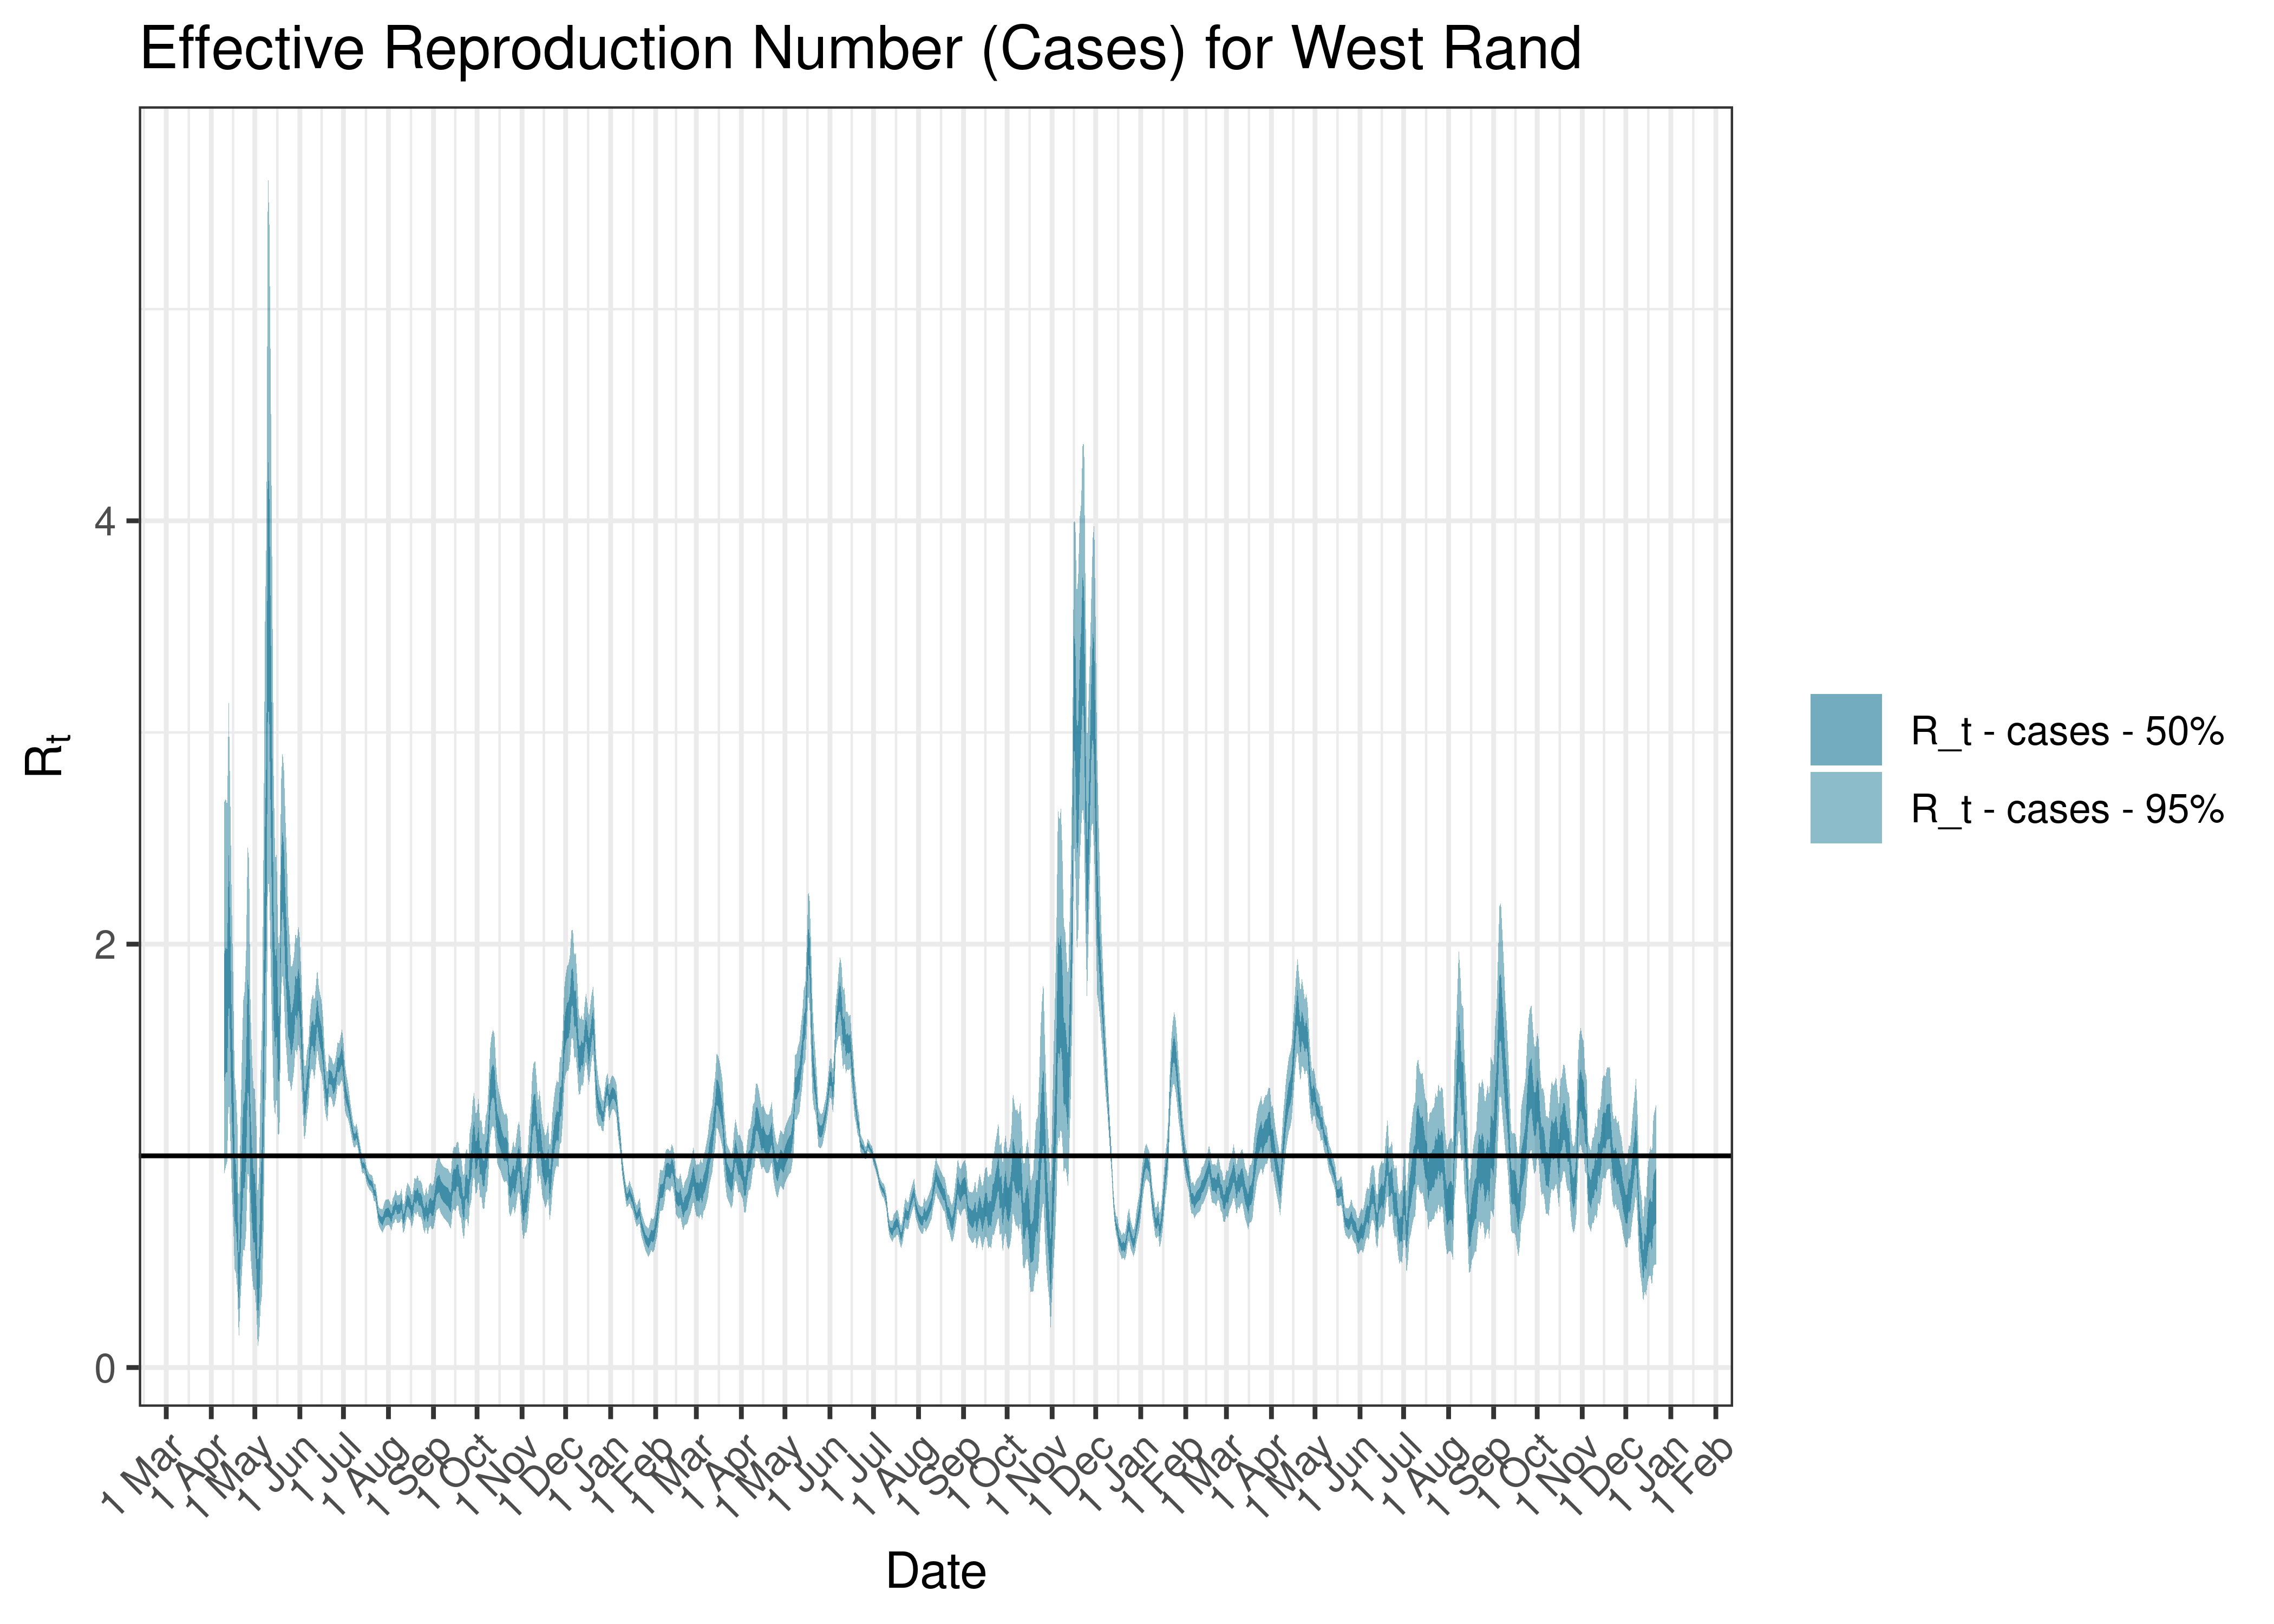 Estimated Effective Reproduction Number Based on Cases for West Rand since 1 April 2020